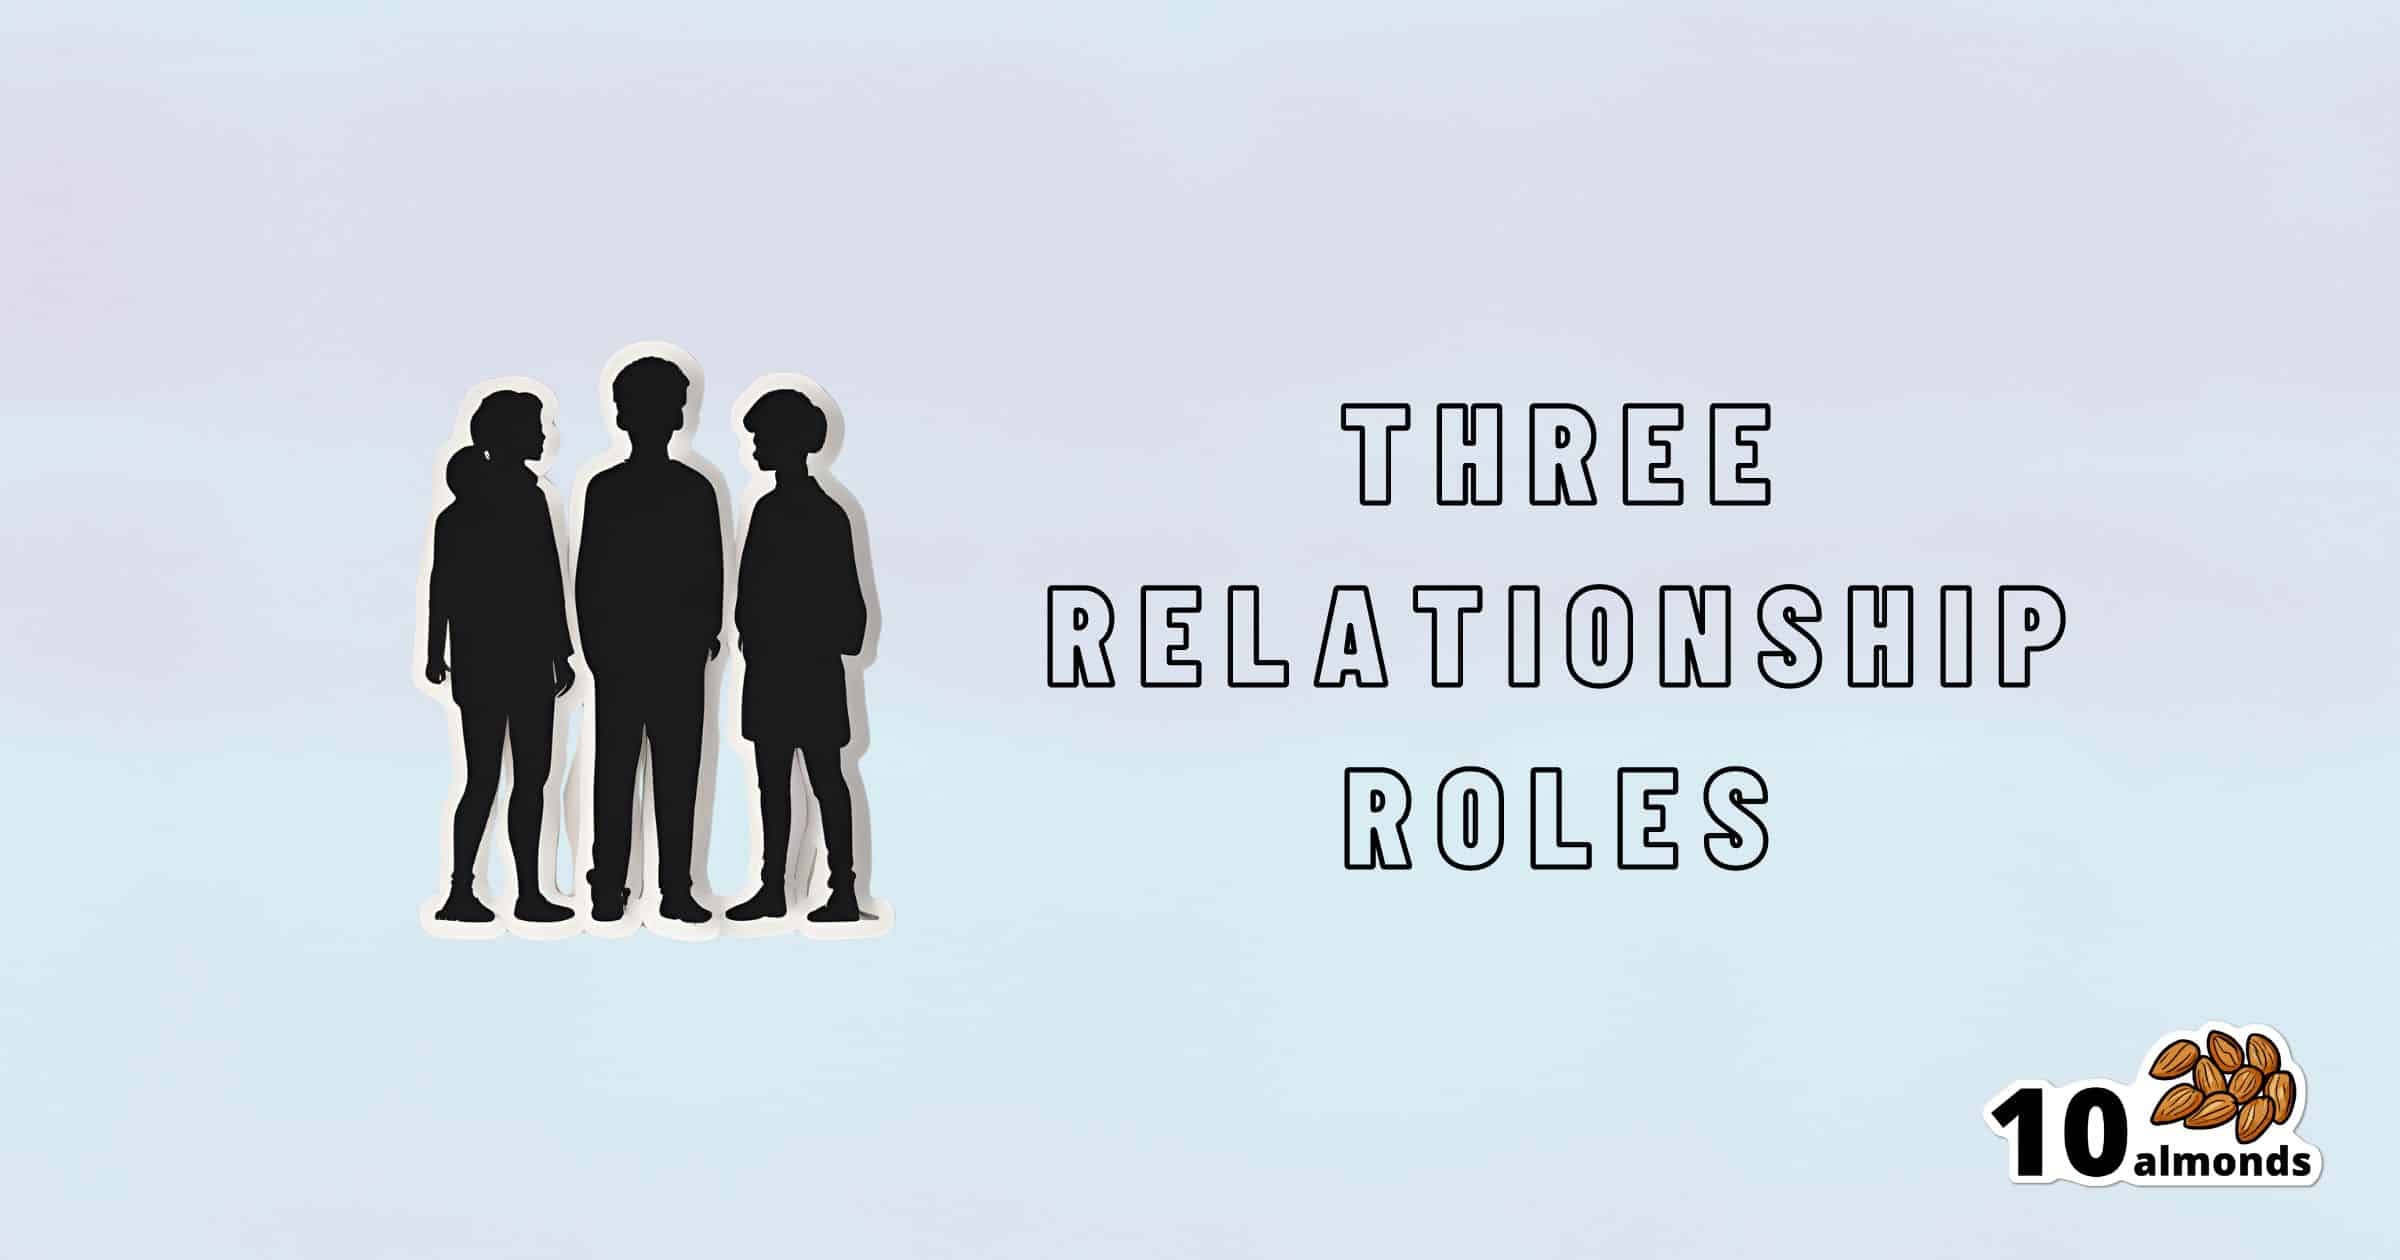 A graphic with a pastel blue background shows silhouettes of three standing people on the left. To the right, bold text reads, 'THREE RELATIONSHIP ROLES,' highlighting key love dynamics. In the bottom right, there is a logo with '10' followed by an image of almonds.